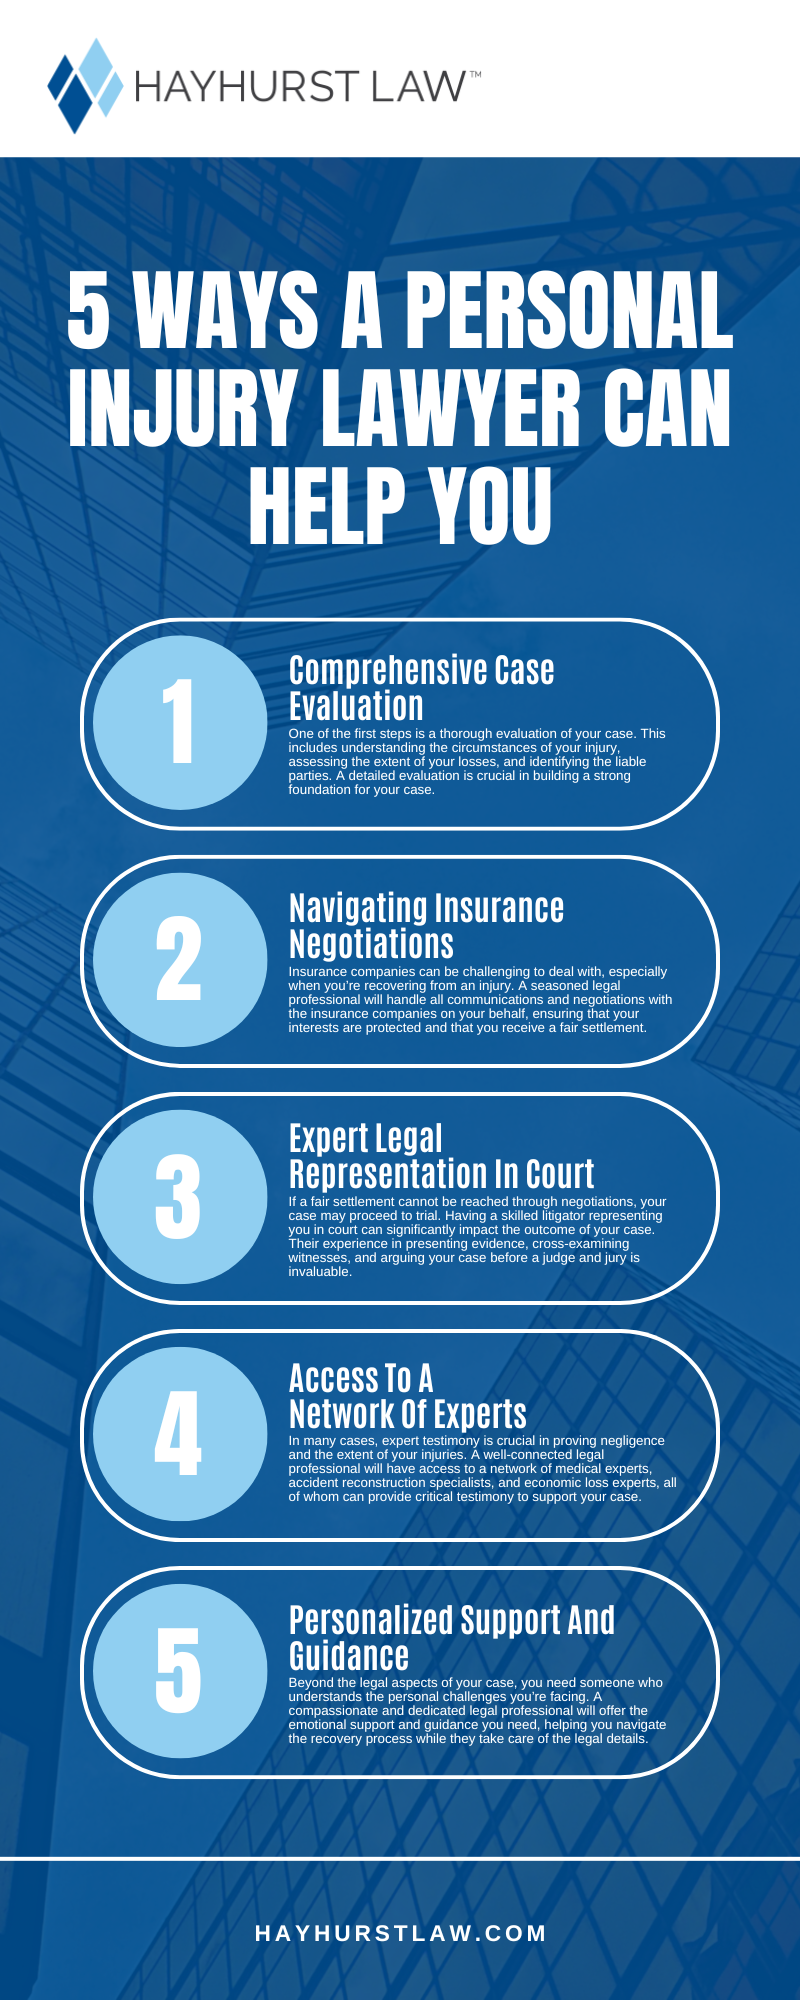 5 Ways A Personal Injury Lawyer Can Help You Infographic